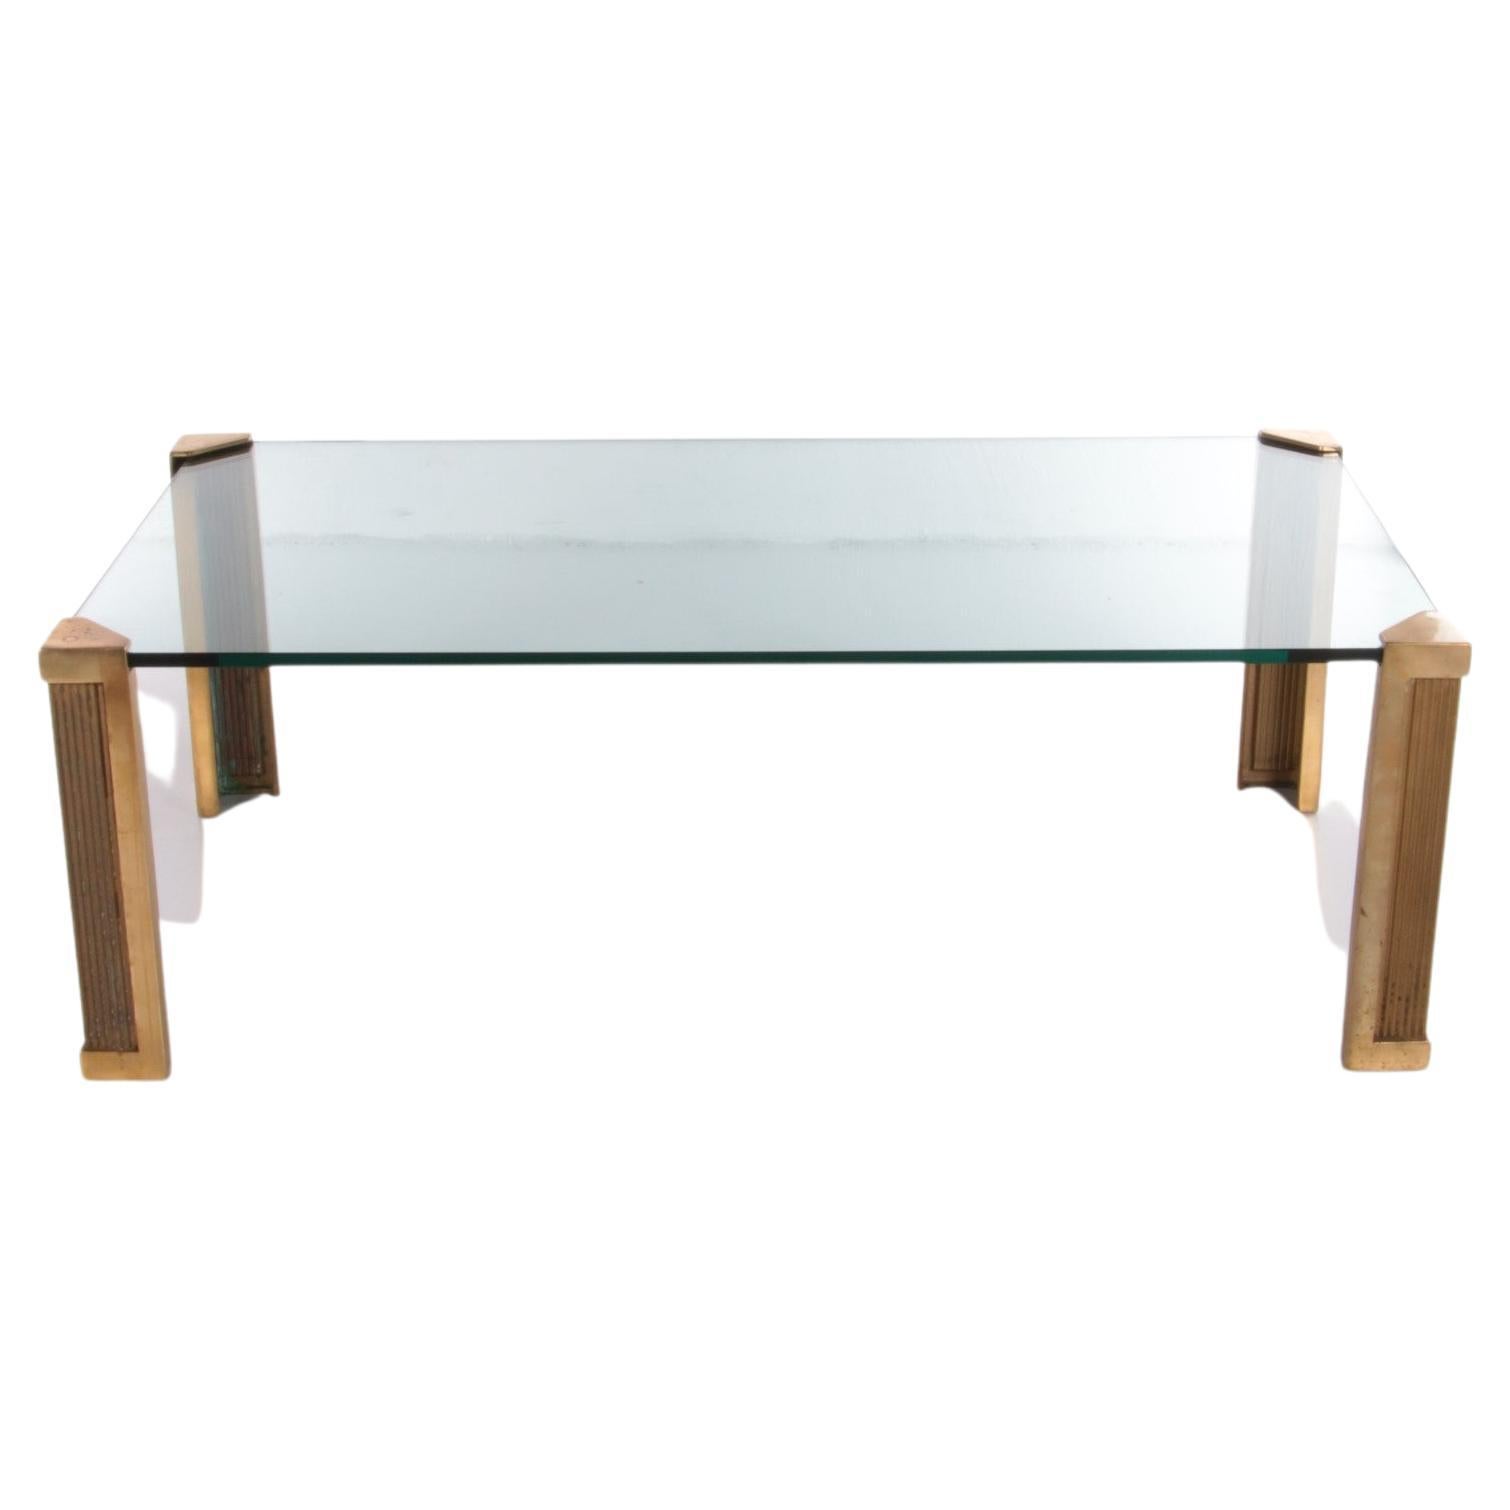 Coffee Table T14 Design by Peter Ghyczy, 1970s